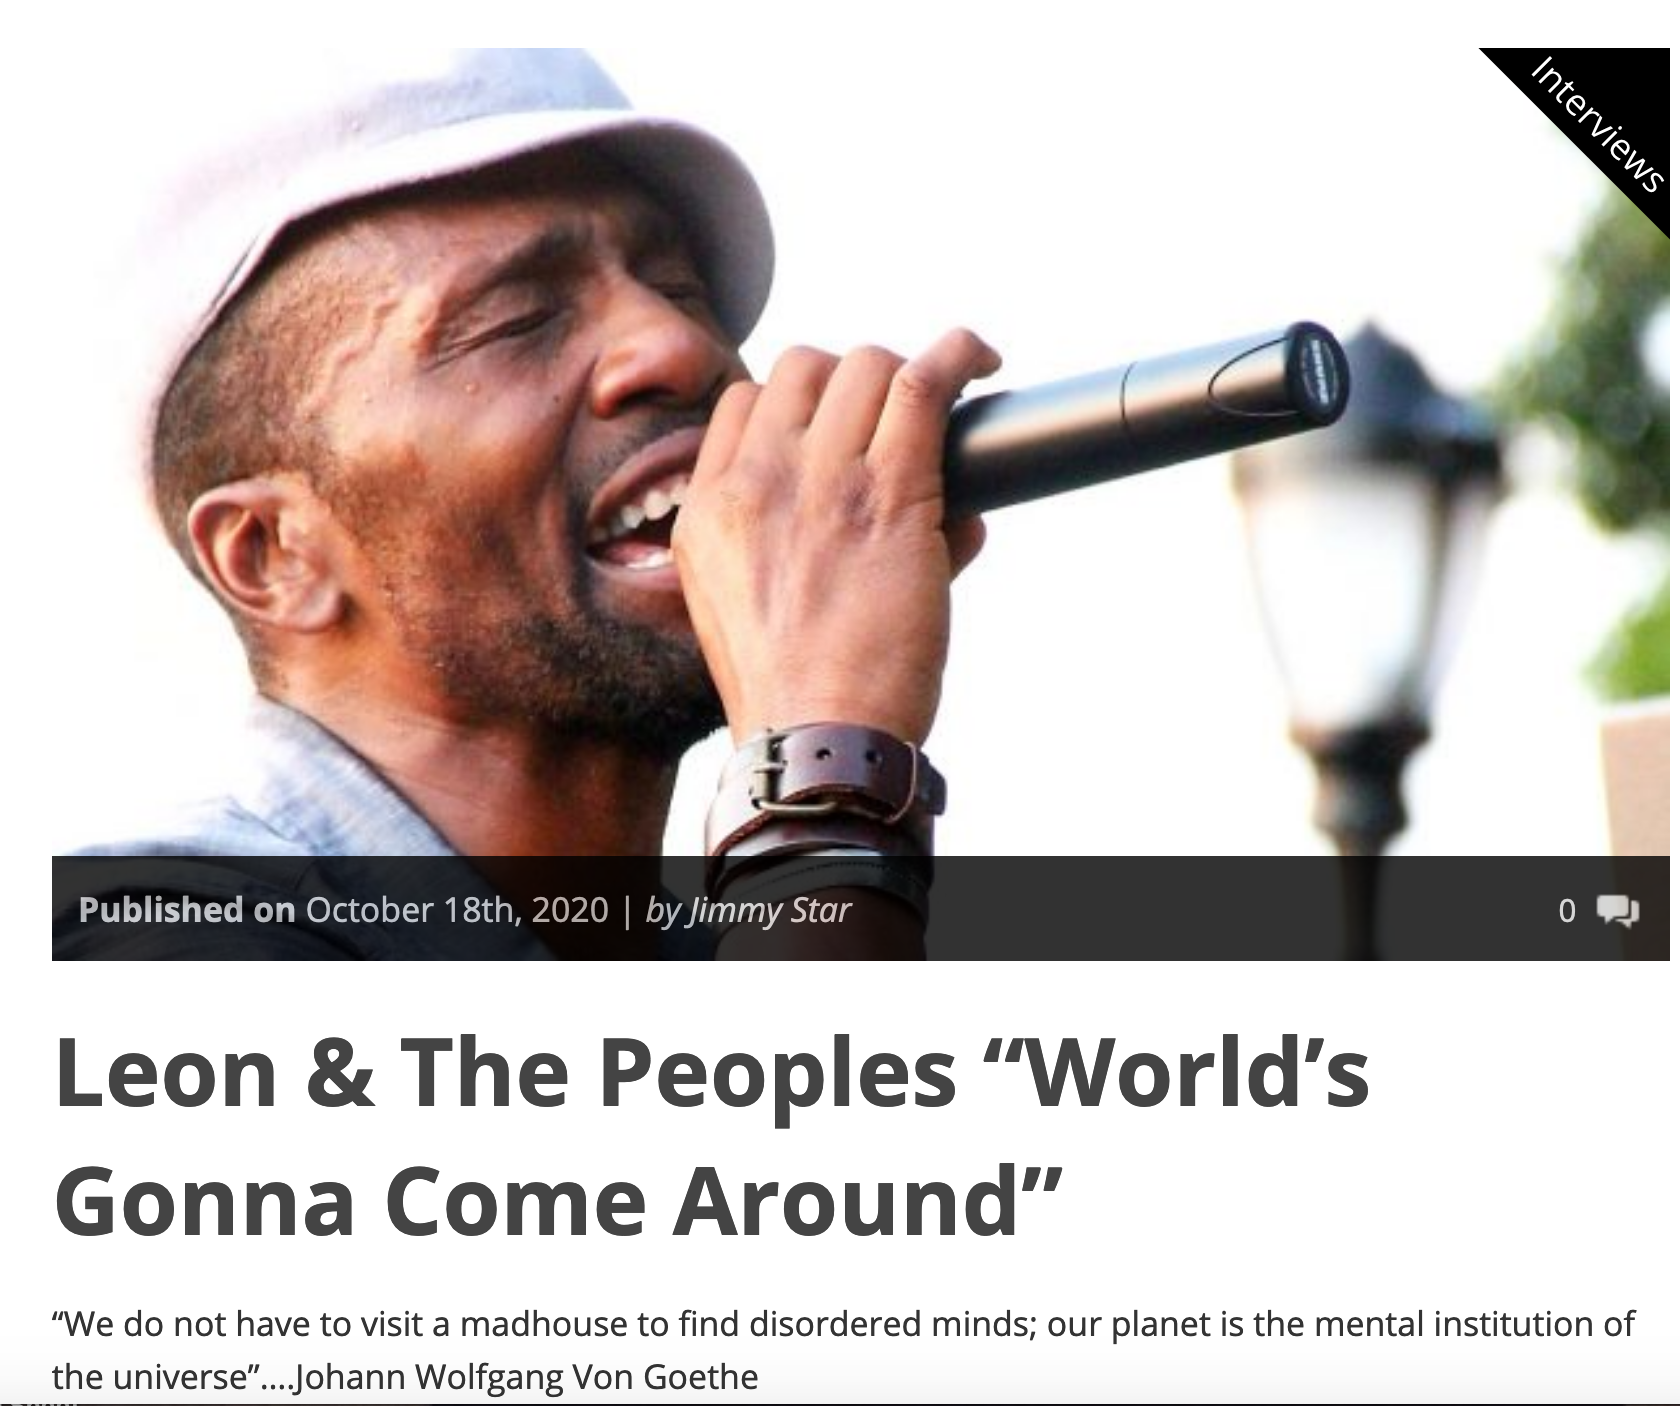 The Hype Magazine Interview Oct.18, 2020
Leon & The Peoples release a powerful and timely music video with an optimistic cry  for change.